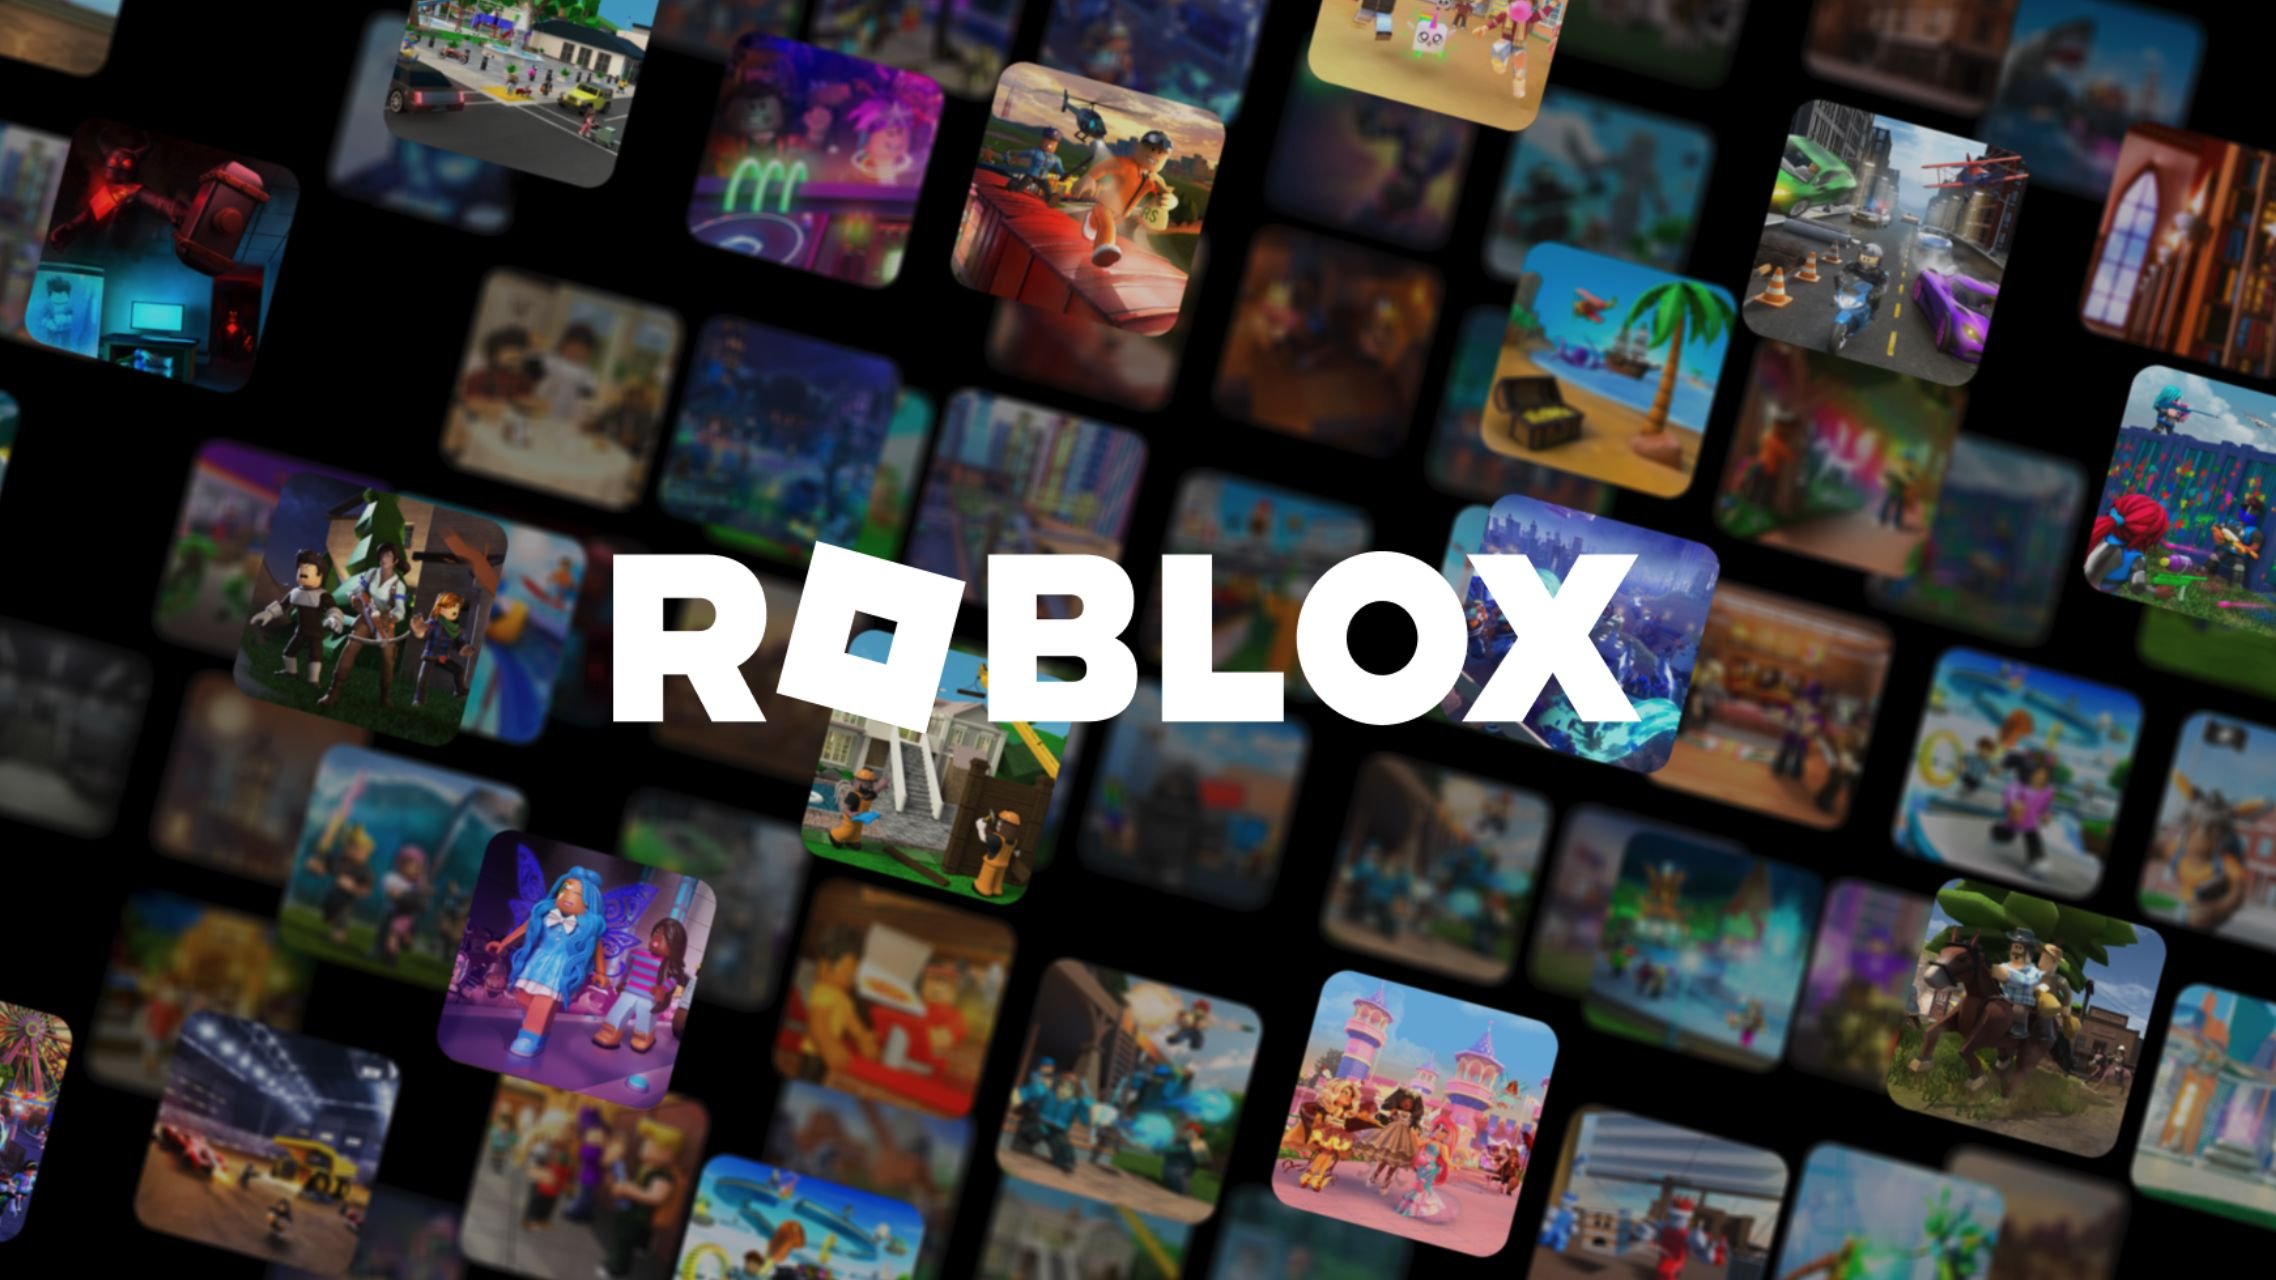 Channel Suzumiya  Roblox News on X: For the first time in over a decade,  Roblox managed to go ONE MONTH without any issues or outages. For most of  us, I'd say